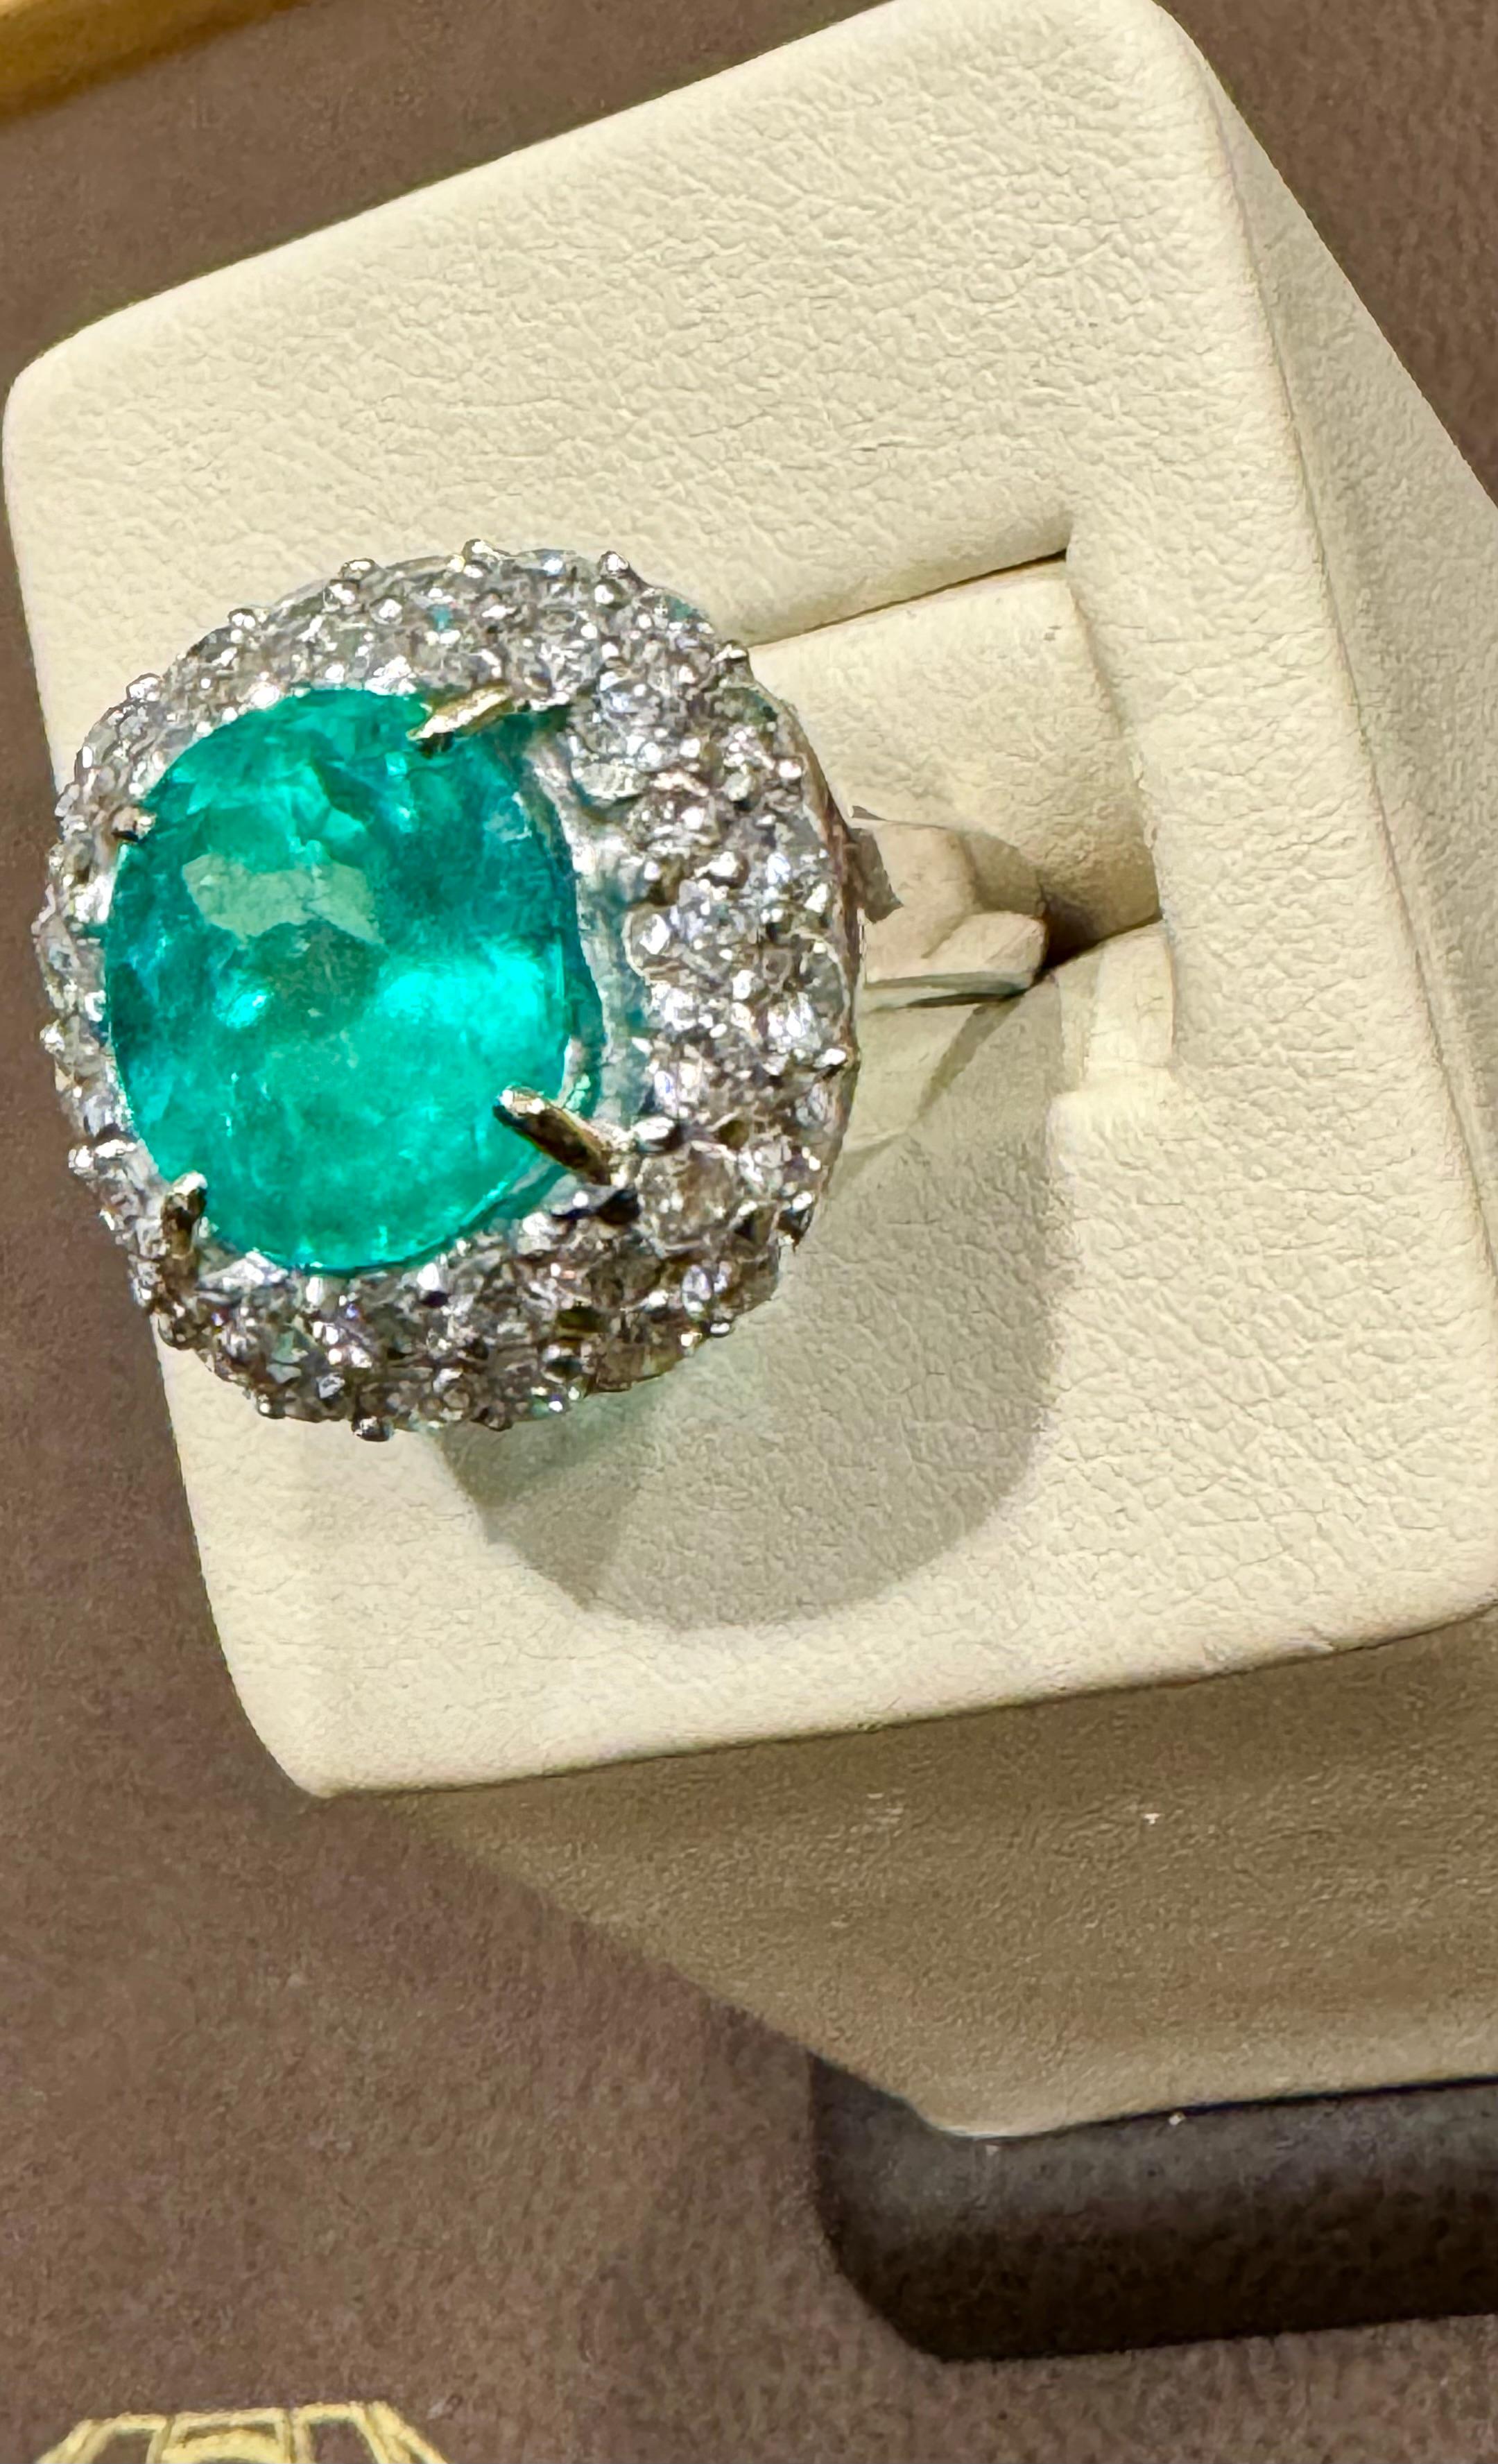 Women's 7 Carat Cushion Cut Colombian Emerald & 3.5 Ct Diamond Ring in Platinum Size 6.2 For Sale